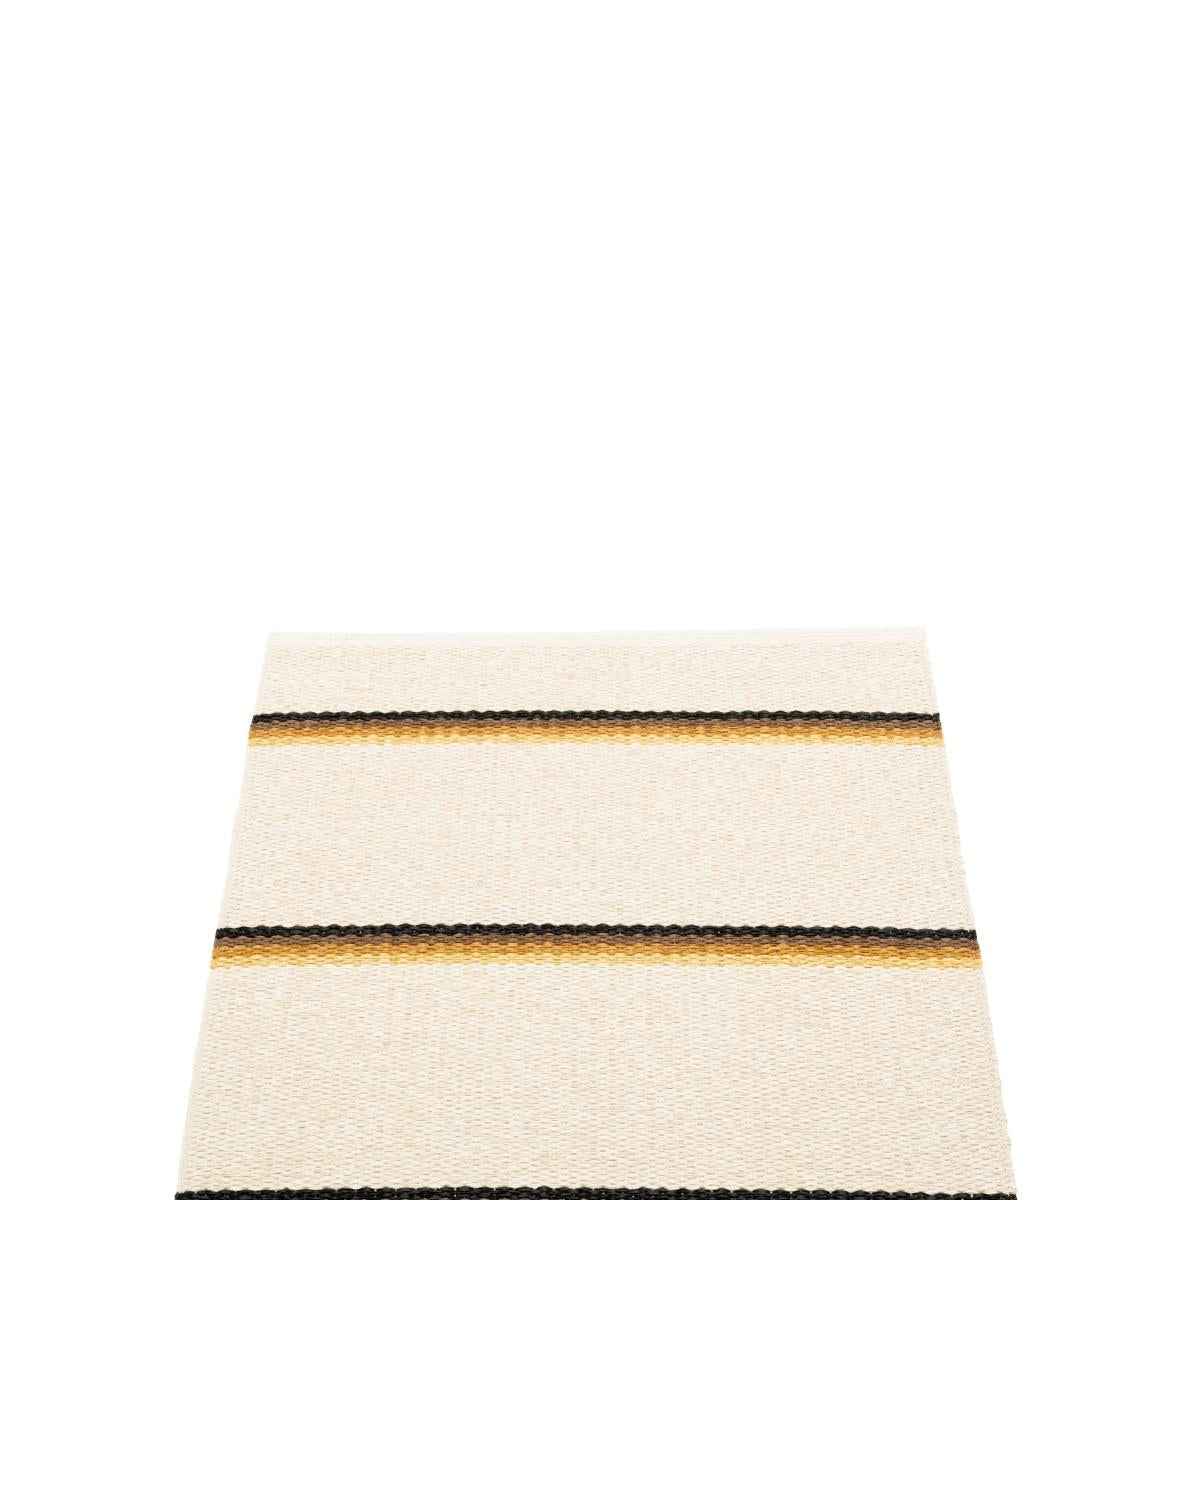 Pappelina Rug OLLE Ochre  image 1